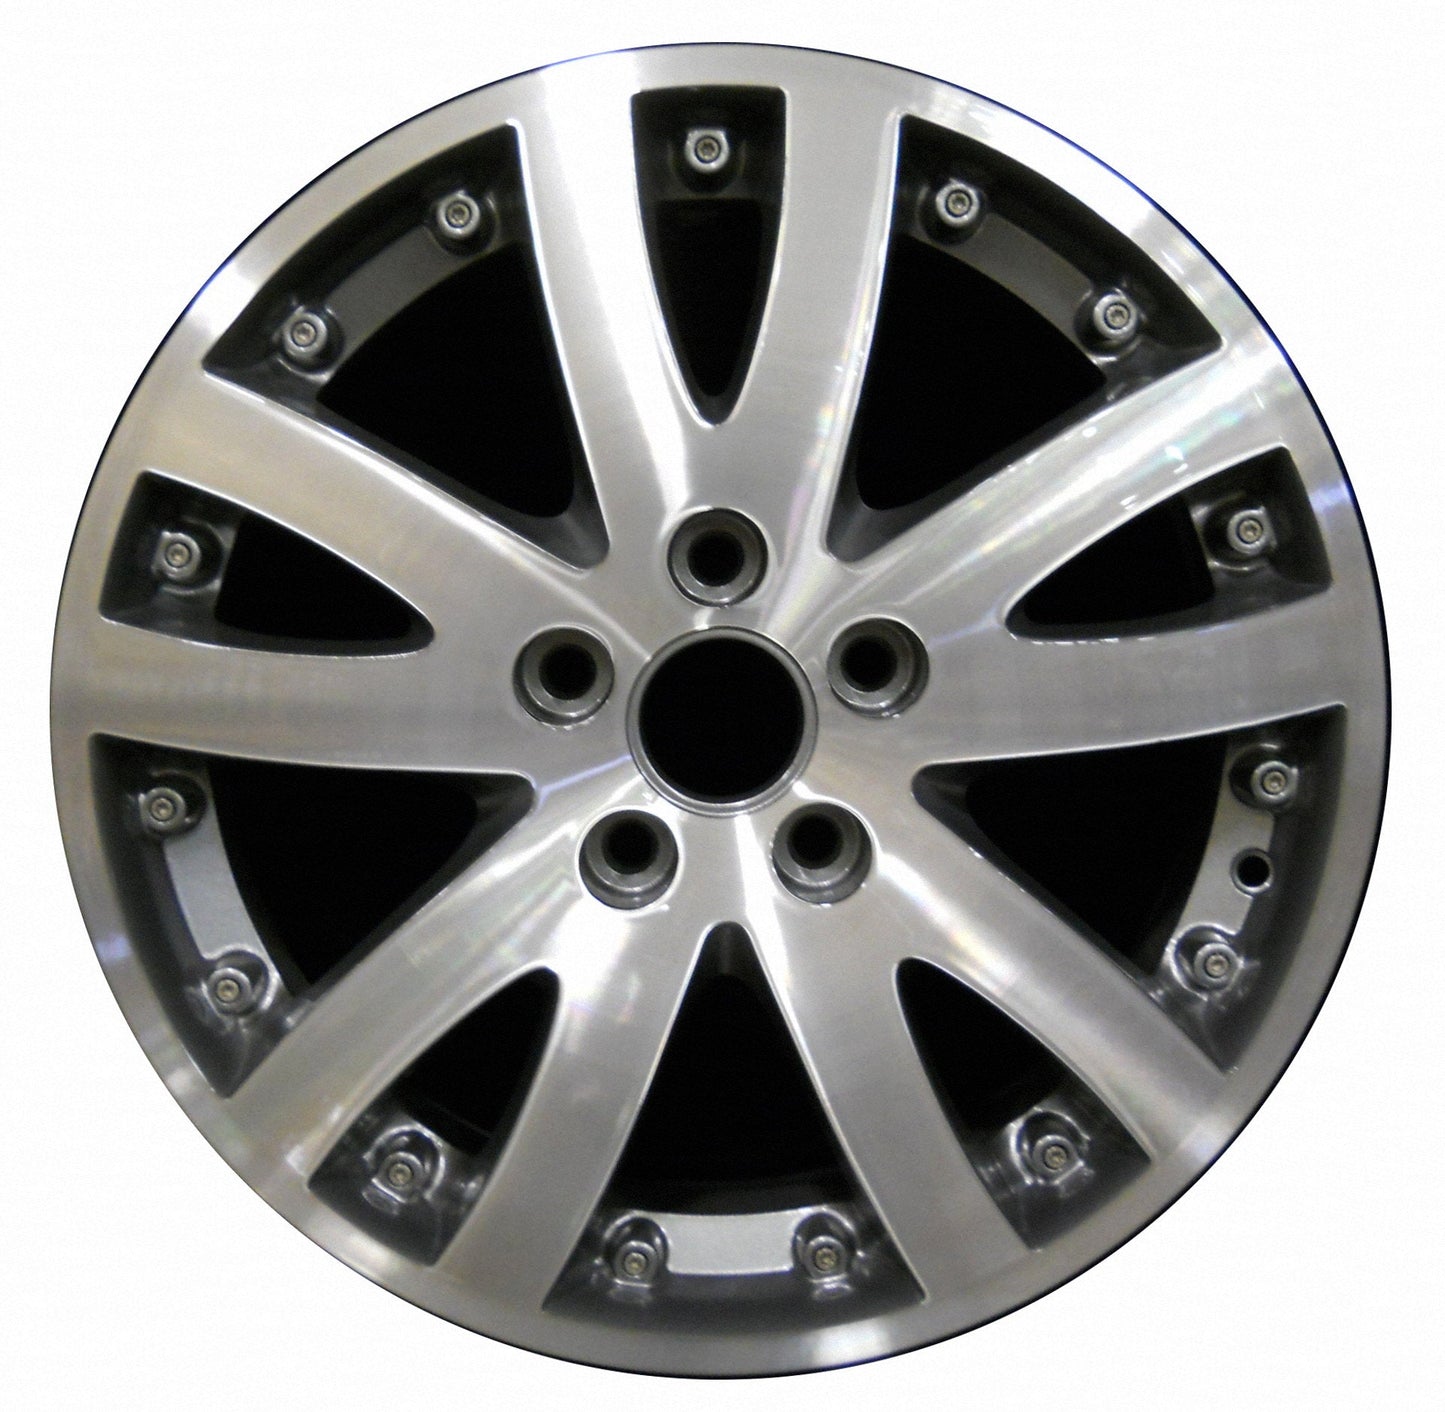 Buick Rendezvous  2004, 2005, 2006 Factory OEM Car Wheel Size 17x6.5 Alloy WAO.4049.LC43.MA